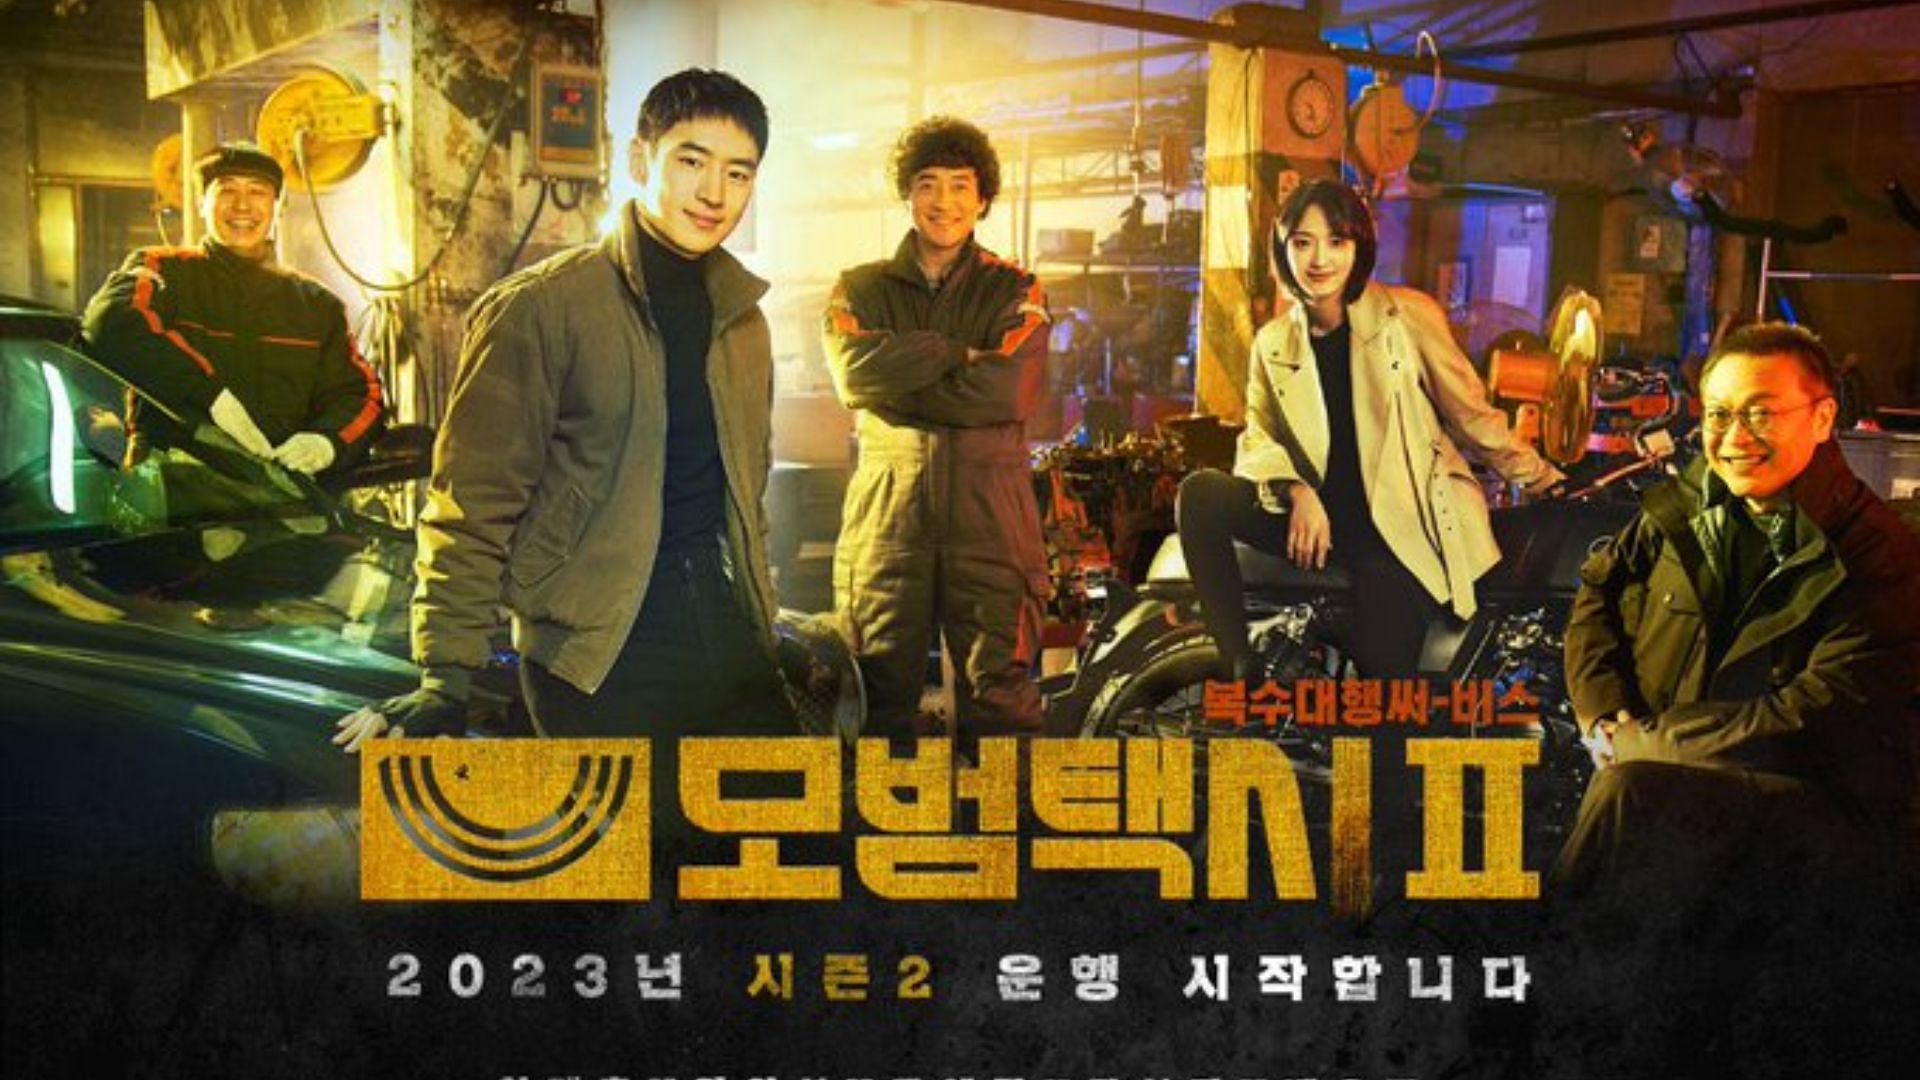 The official poster for Taxi Driver (Image via SBS drama)